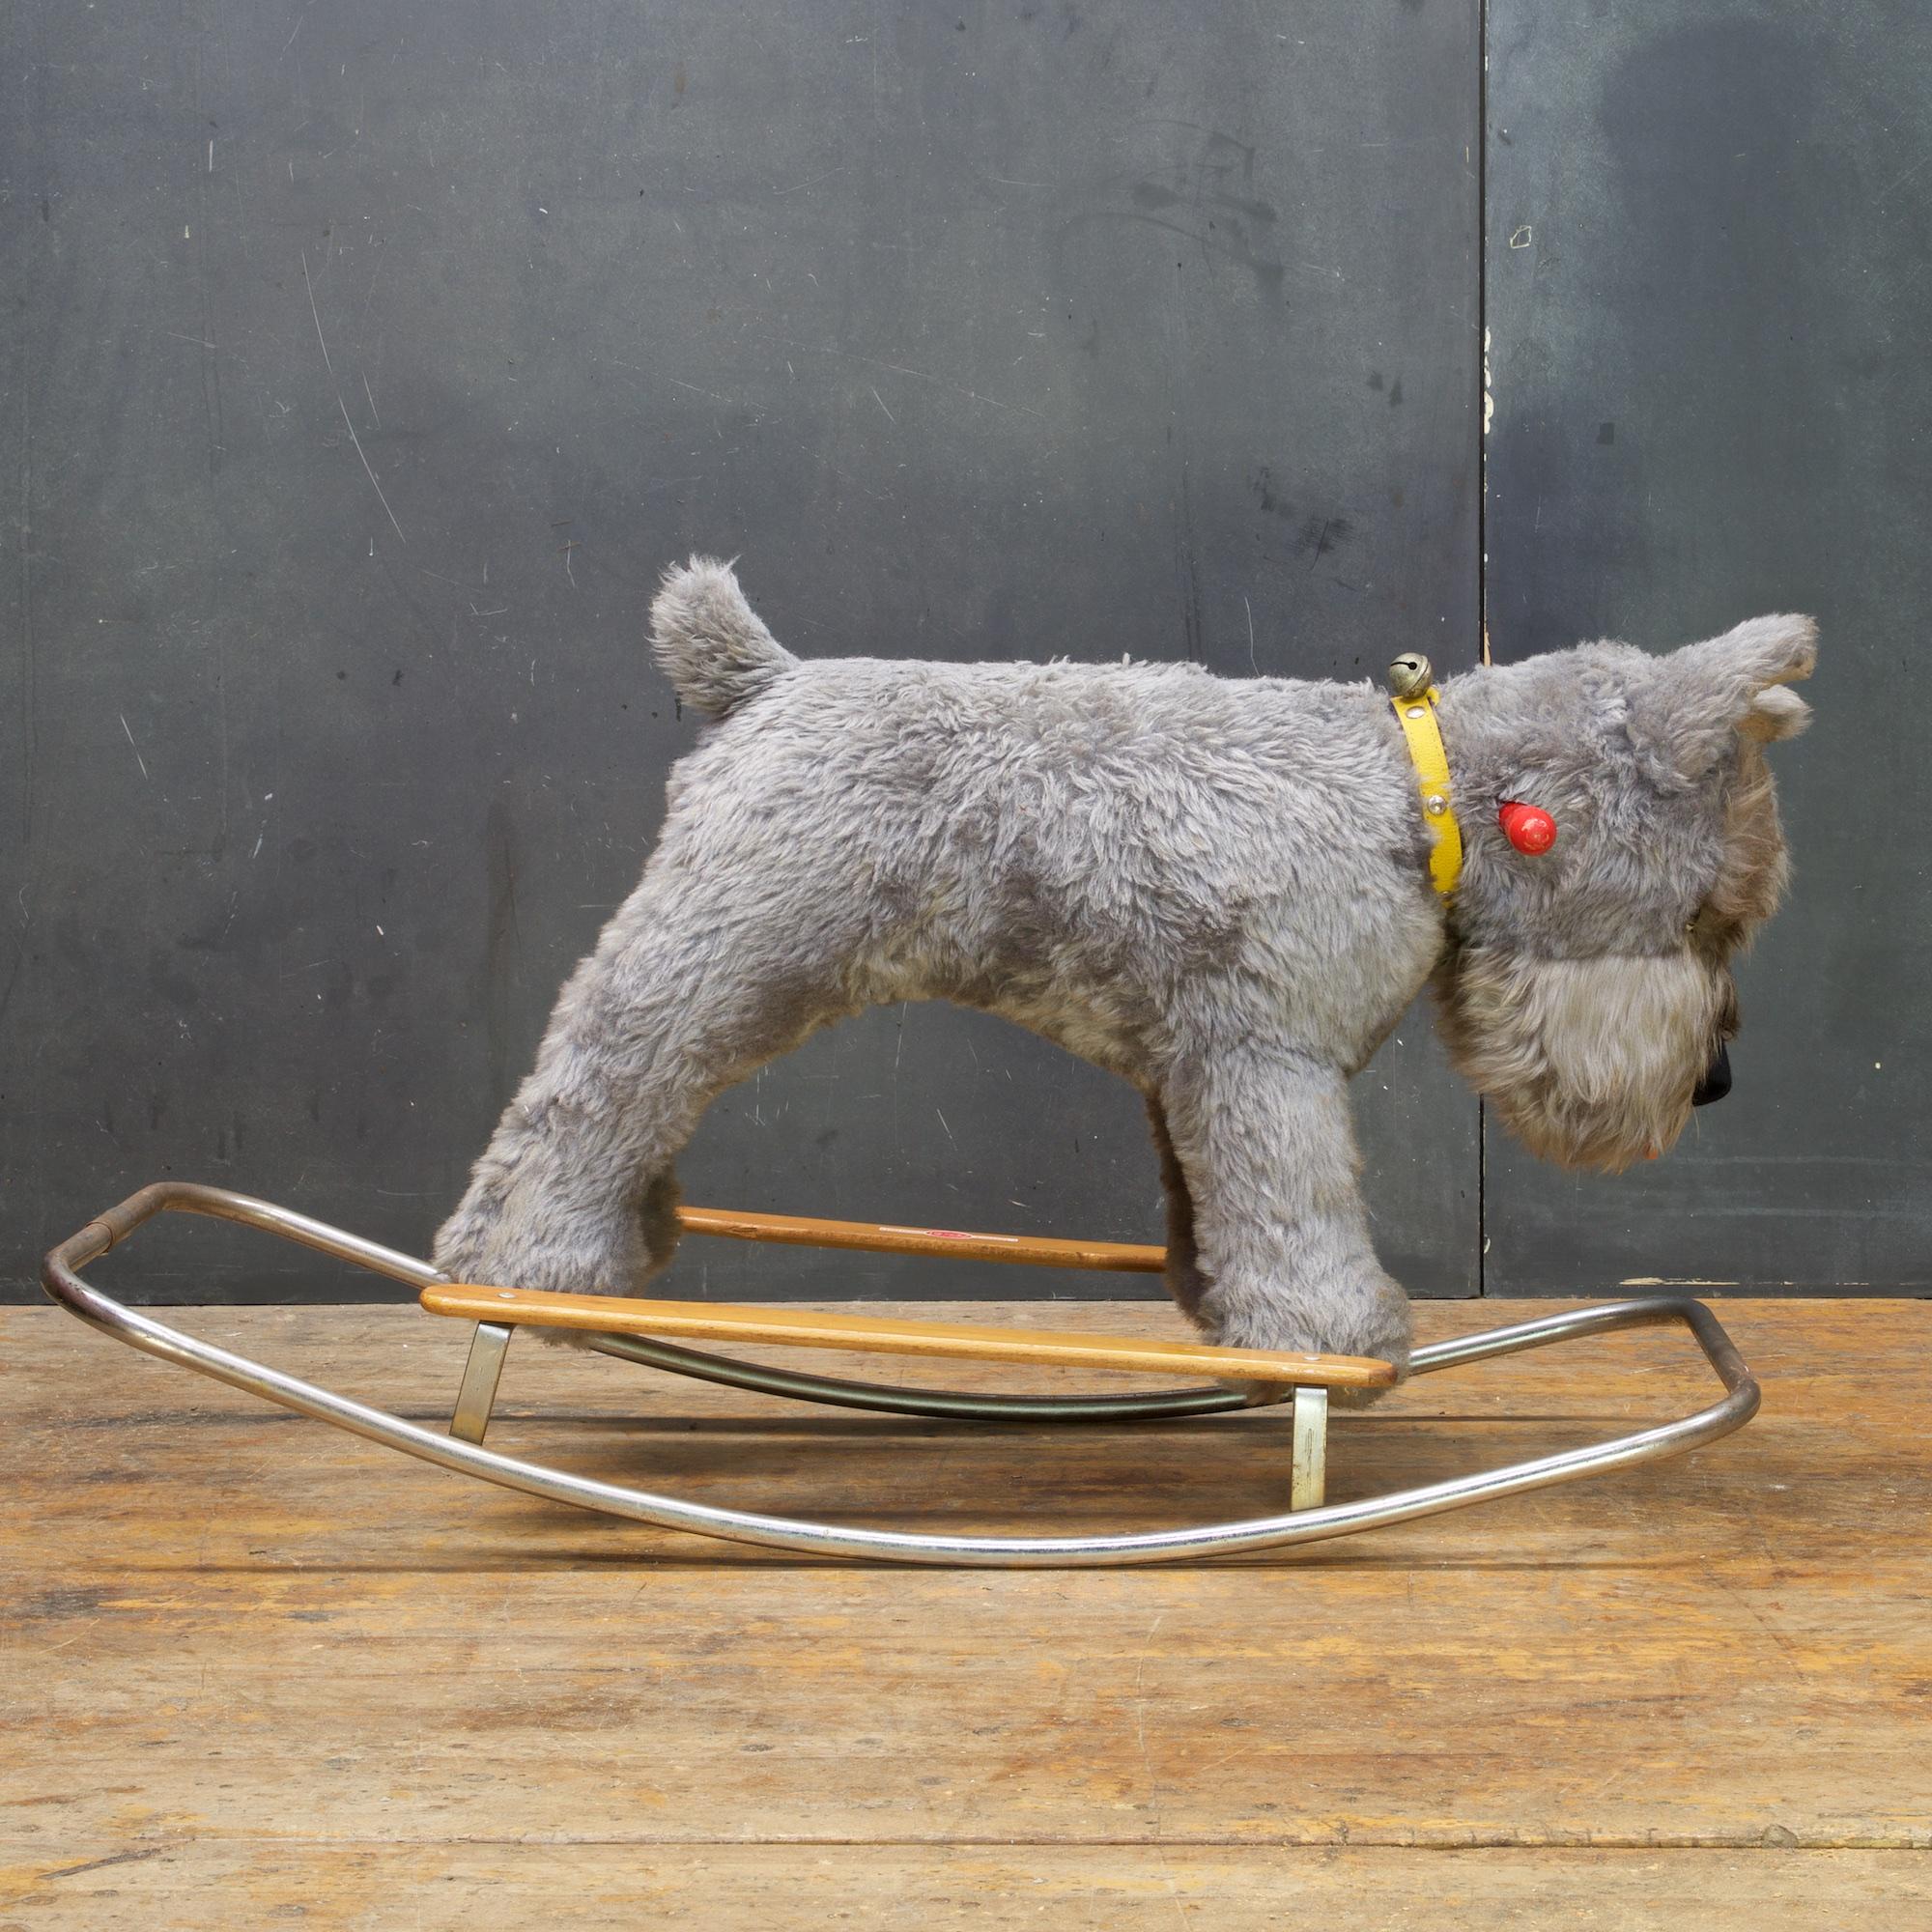 Looks like a character out of the movie, Isle of dogs. A very Interesting vintage infants rocker-riding toy. Stuffed (Kerry Blue) Terrier on birch runners and chromed steel tubular framing. Made in Italy by Trudi.